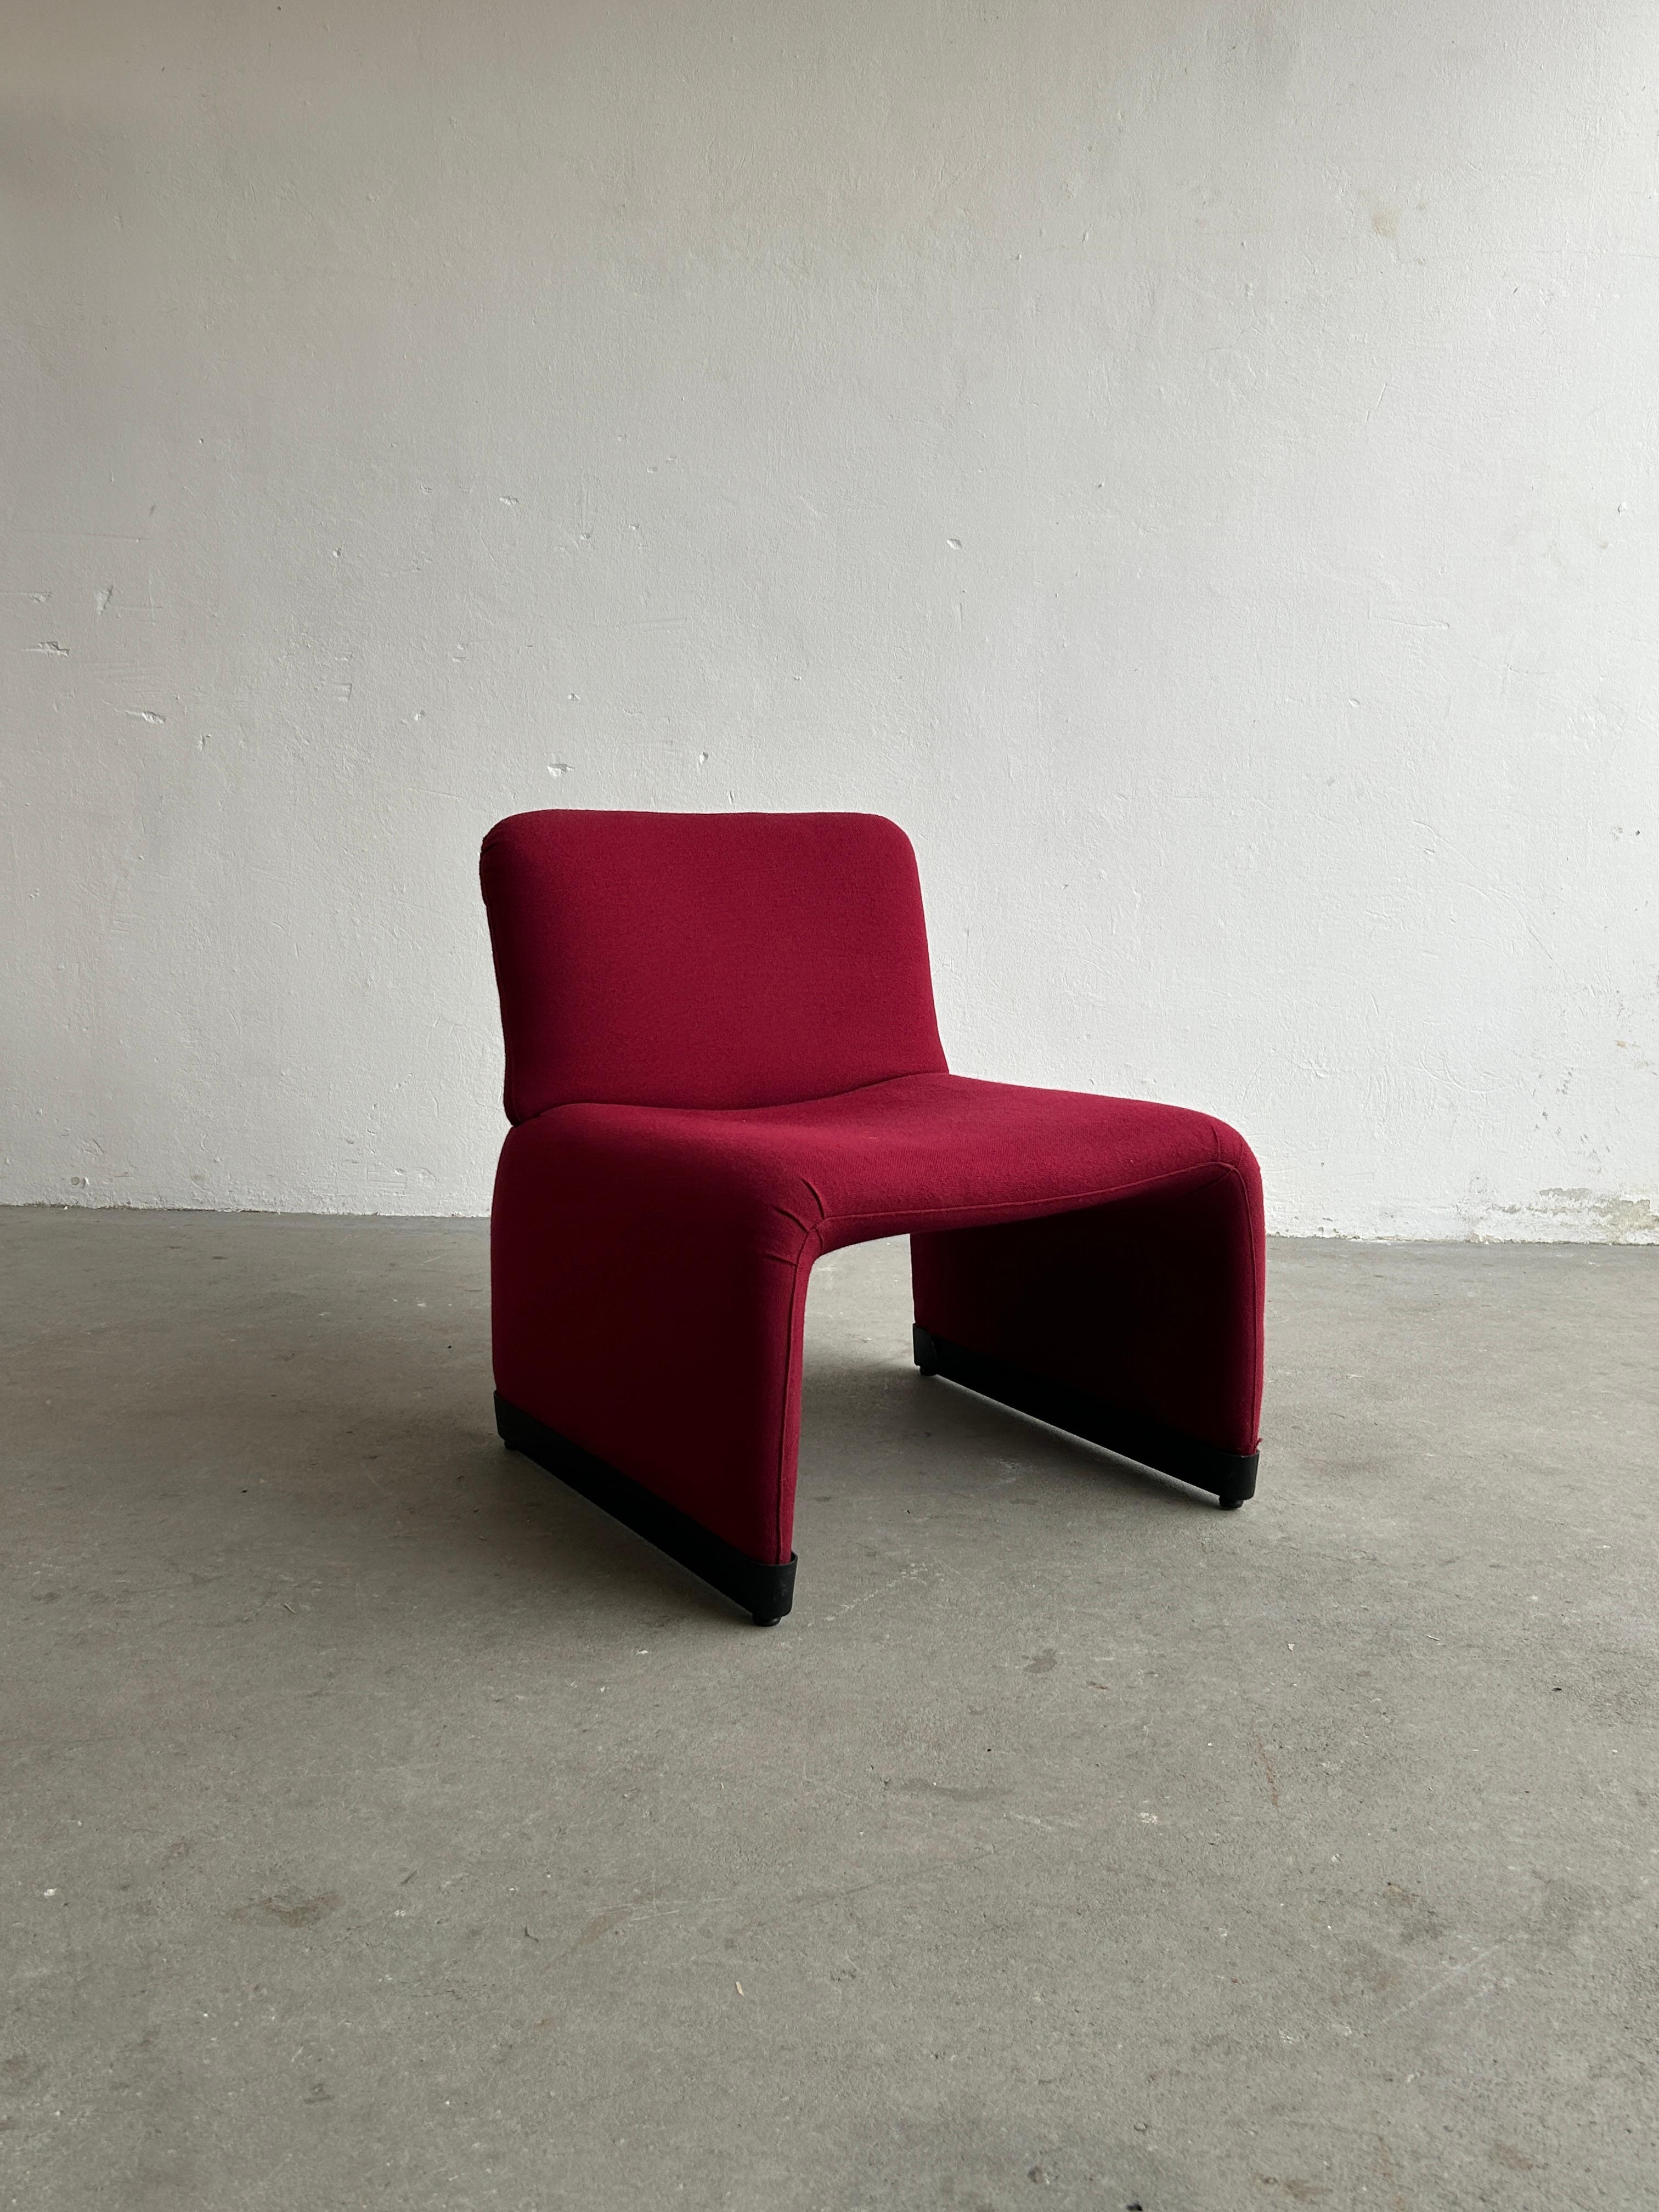 An eye-catching 1970s Italian vintage lounge chair, once a part of an Italian local government office inventory.
Following the style of the 'Alky' chair by Giancarlo Piretti for Anonima Castelly.

Overall in good vintage condition with expected